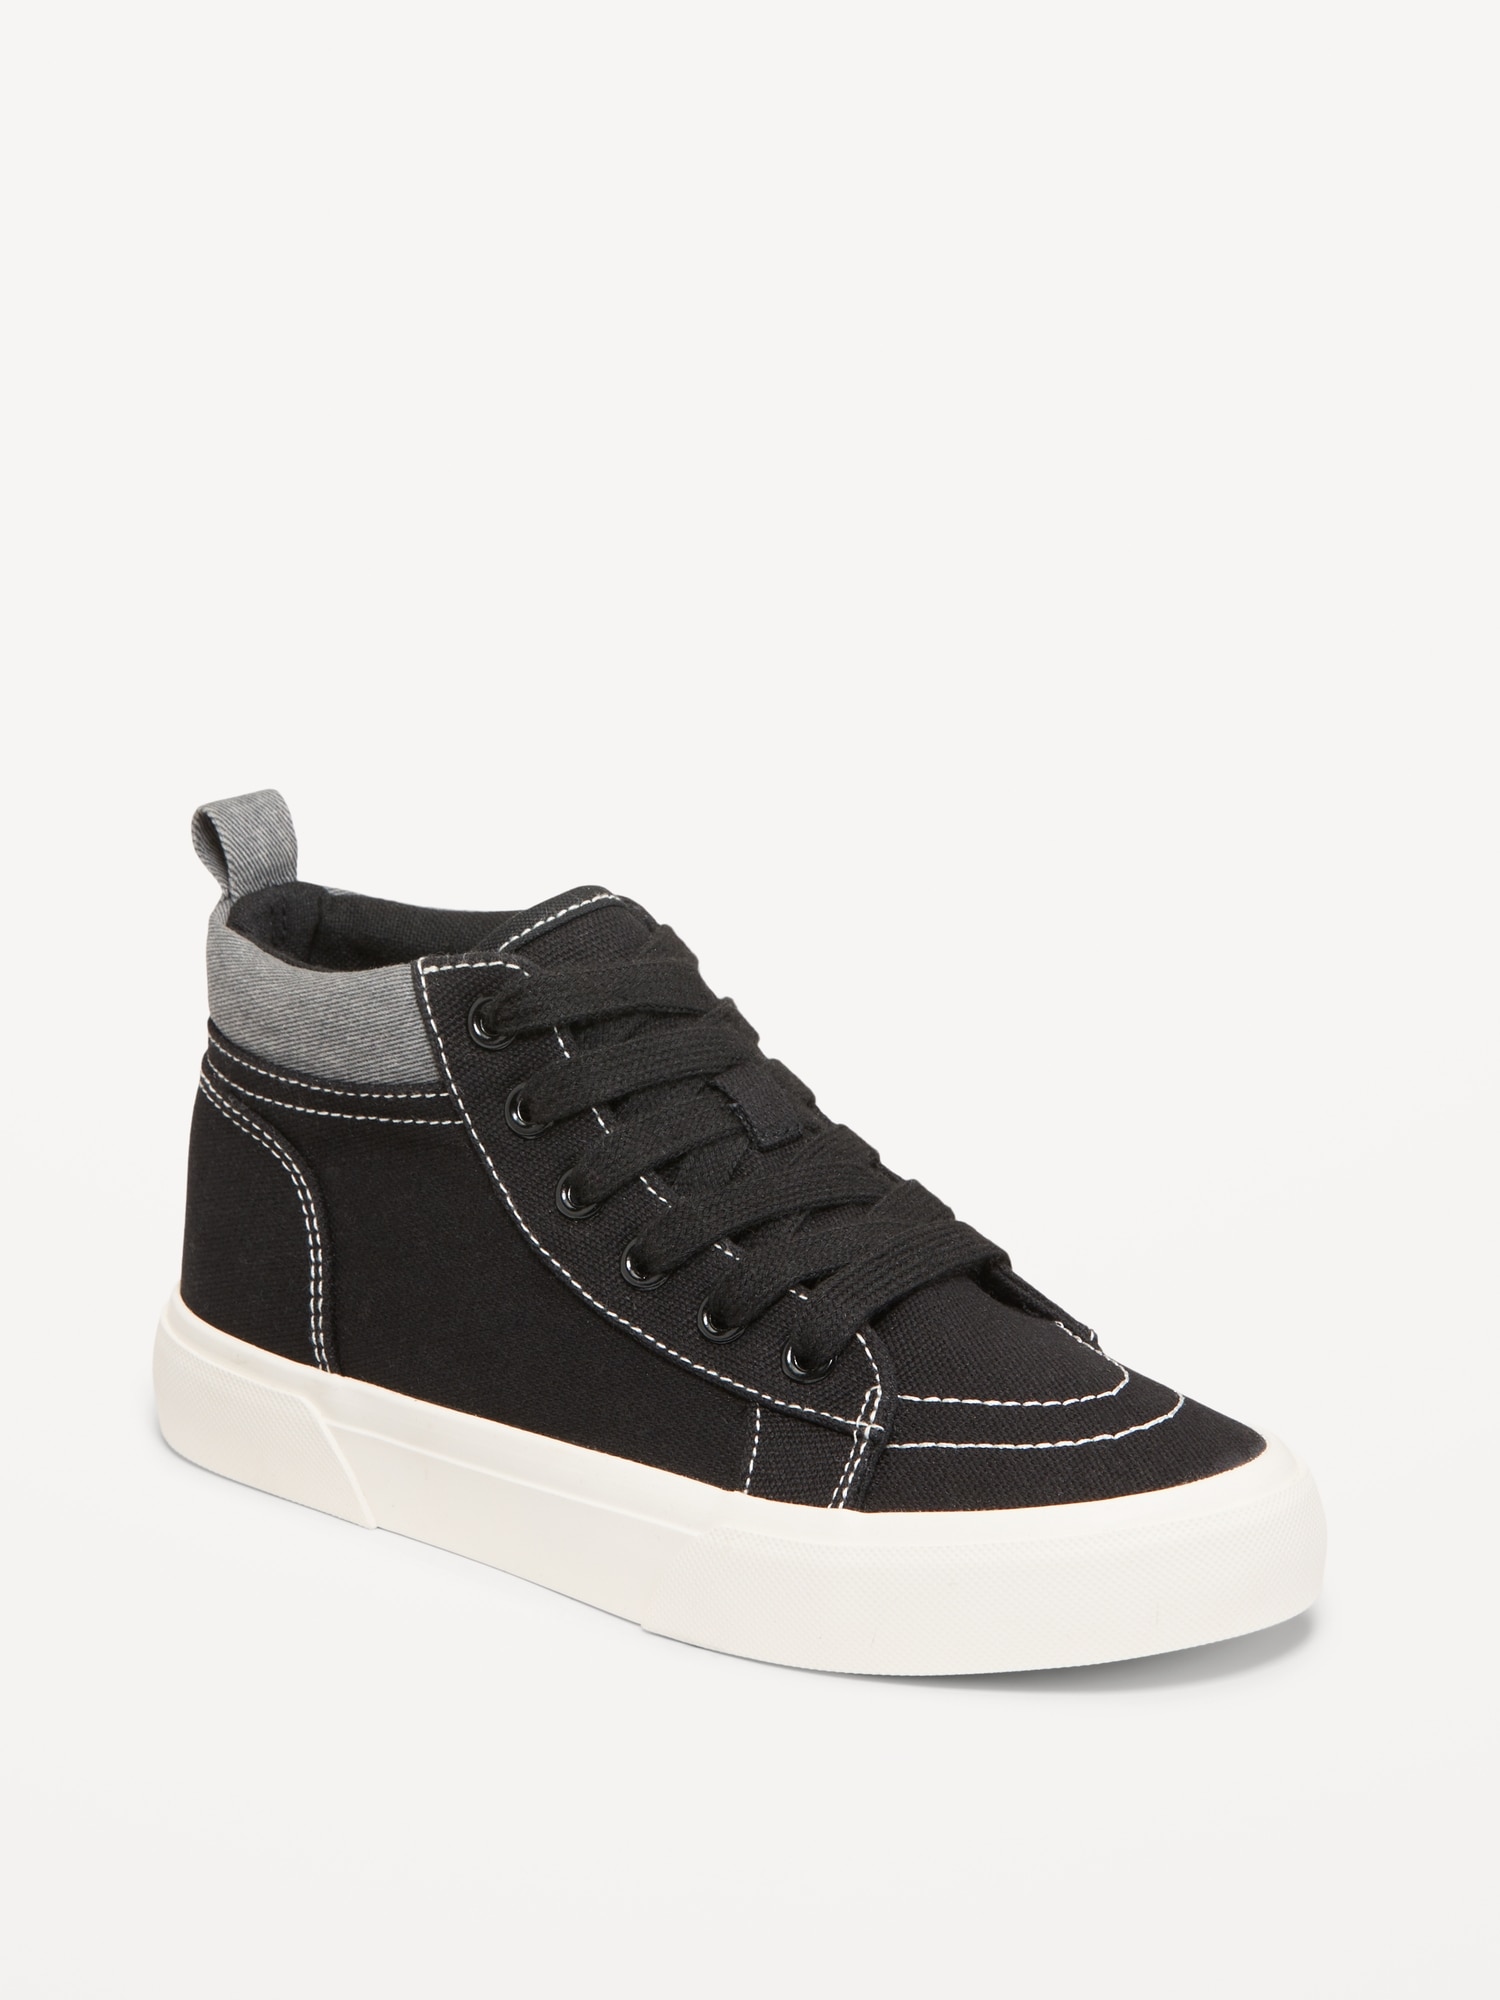 High-Top Canvas Sneakers for Boys